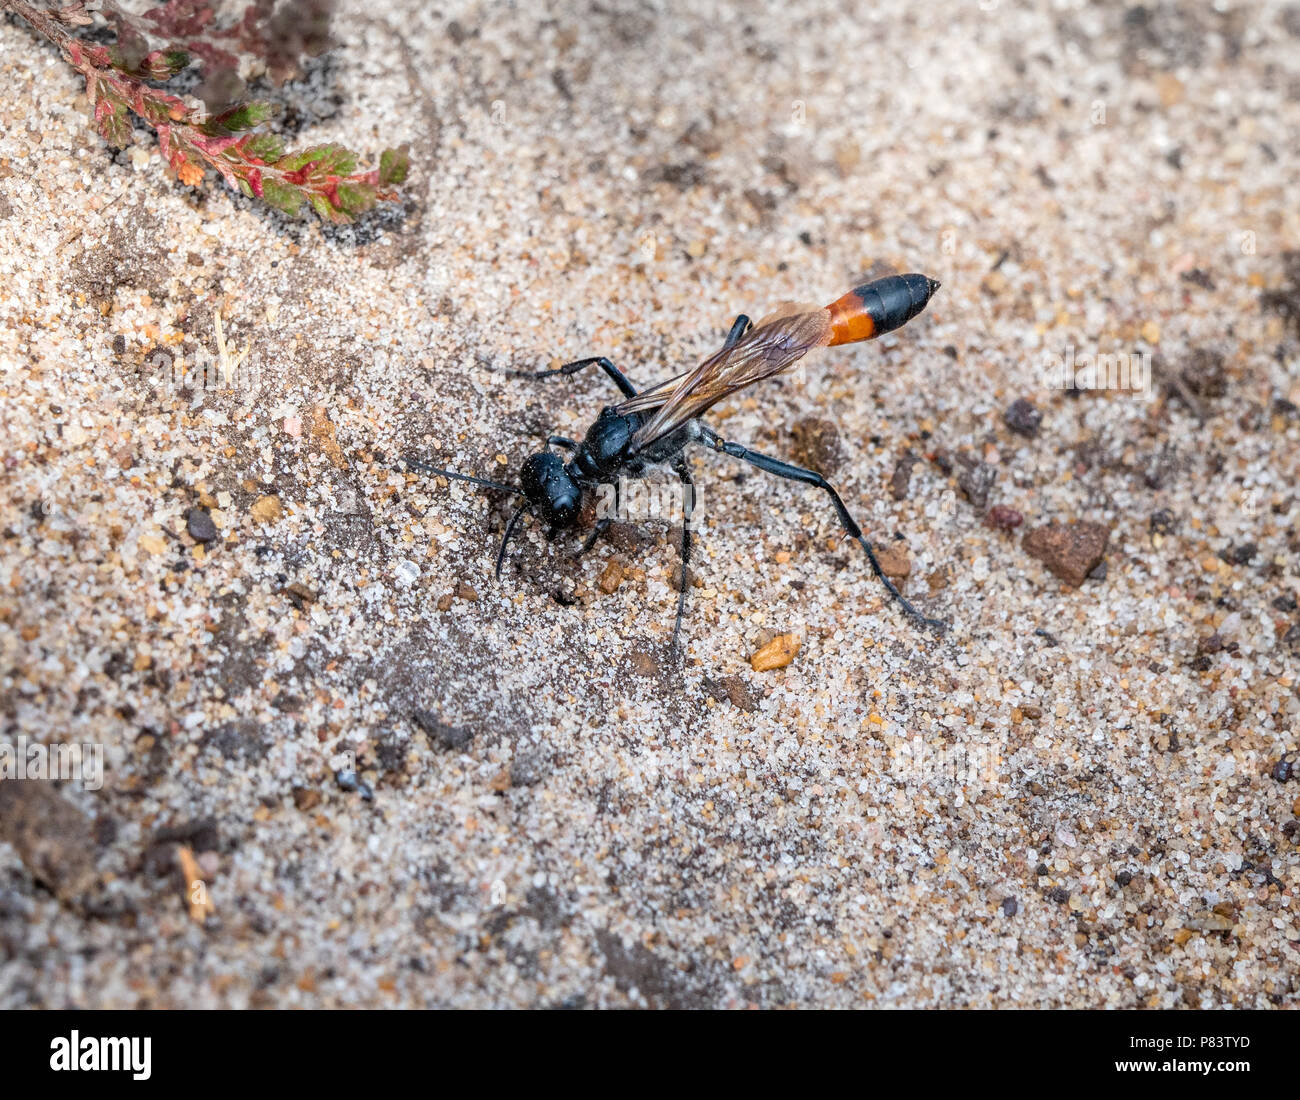 Ammophila sabulosa the red-banded sand wasp placing stones over the entrance to its burrow to hide it from predators - Thursley Common Surrey UK Stock Photo